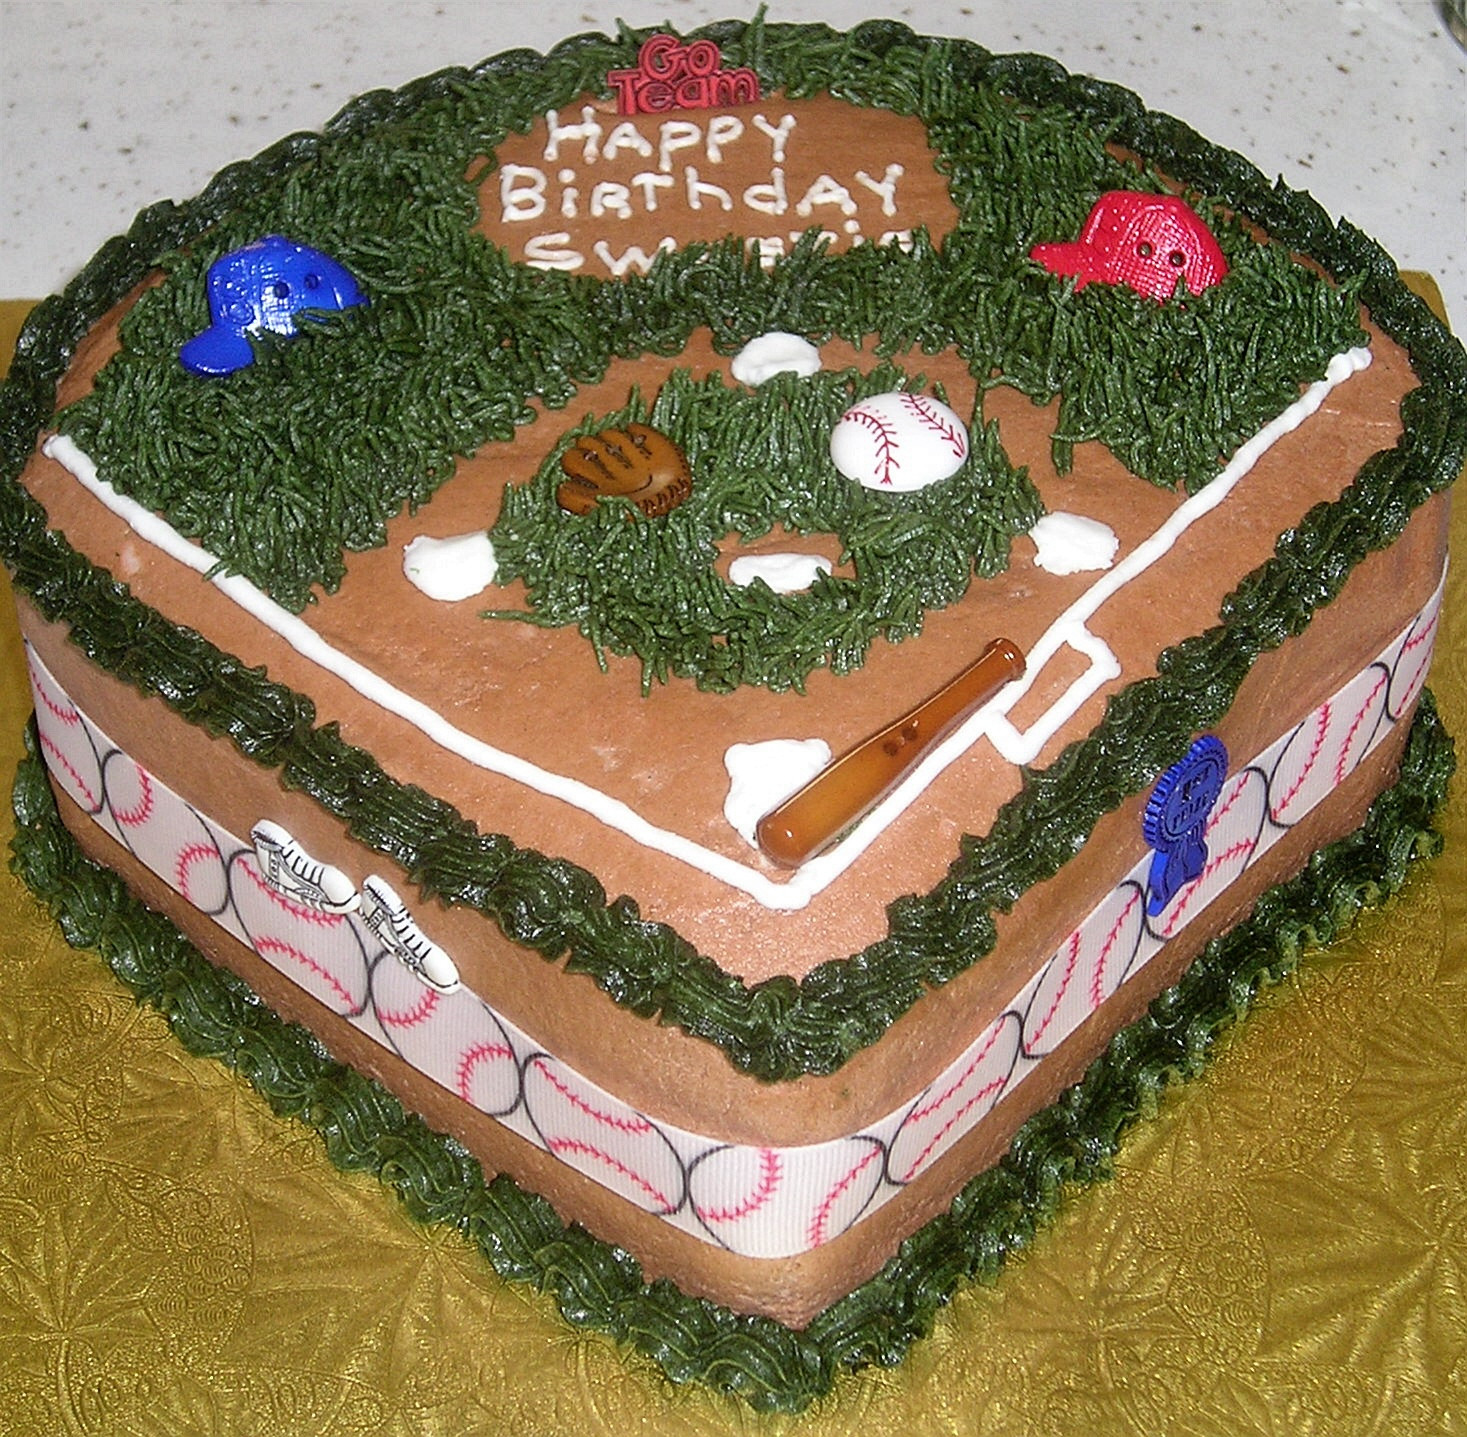 Picture Of Birthday Cake
 Baseball Cakes – Decoration Ideas